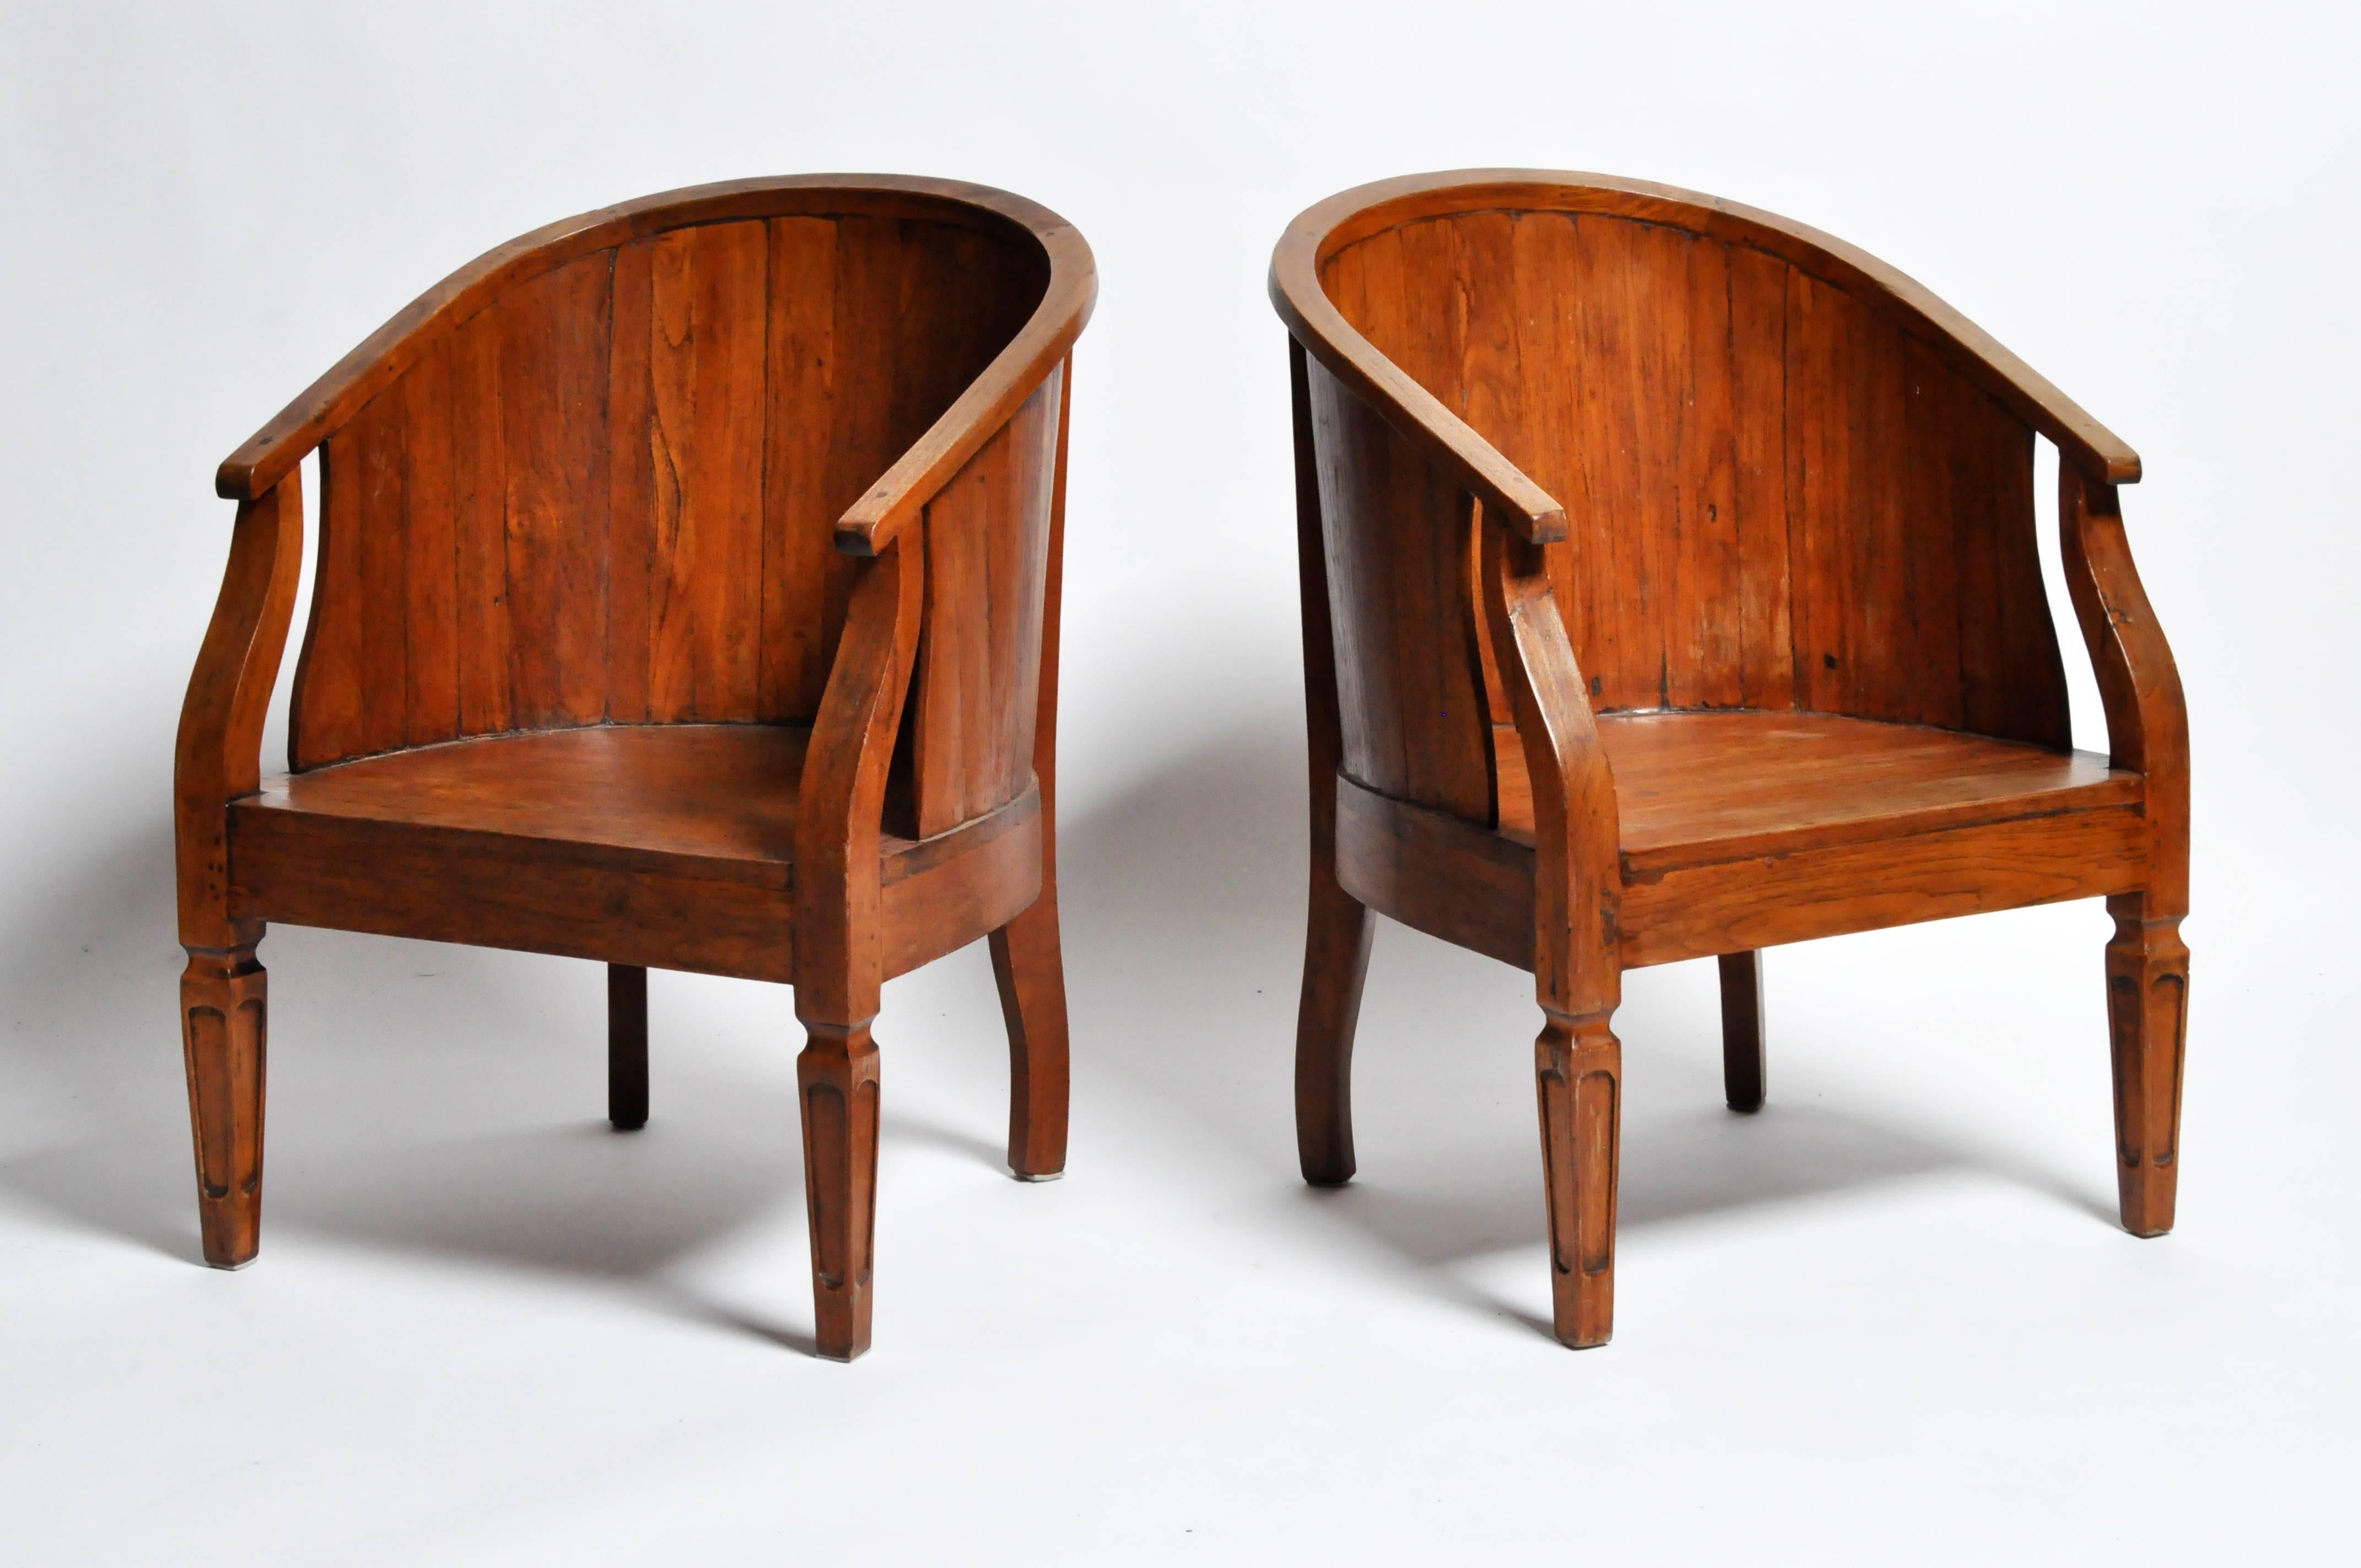 Contemporary British Colonial Round Back Chairs